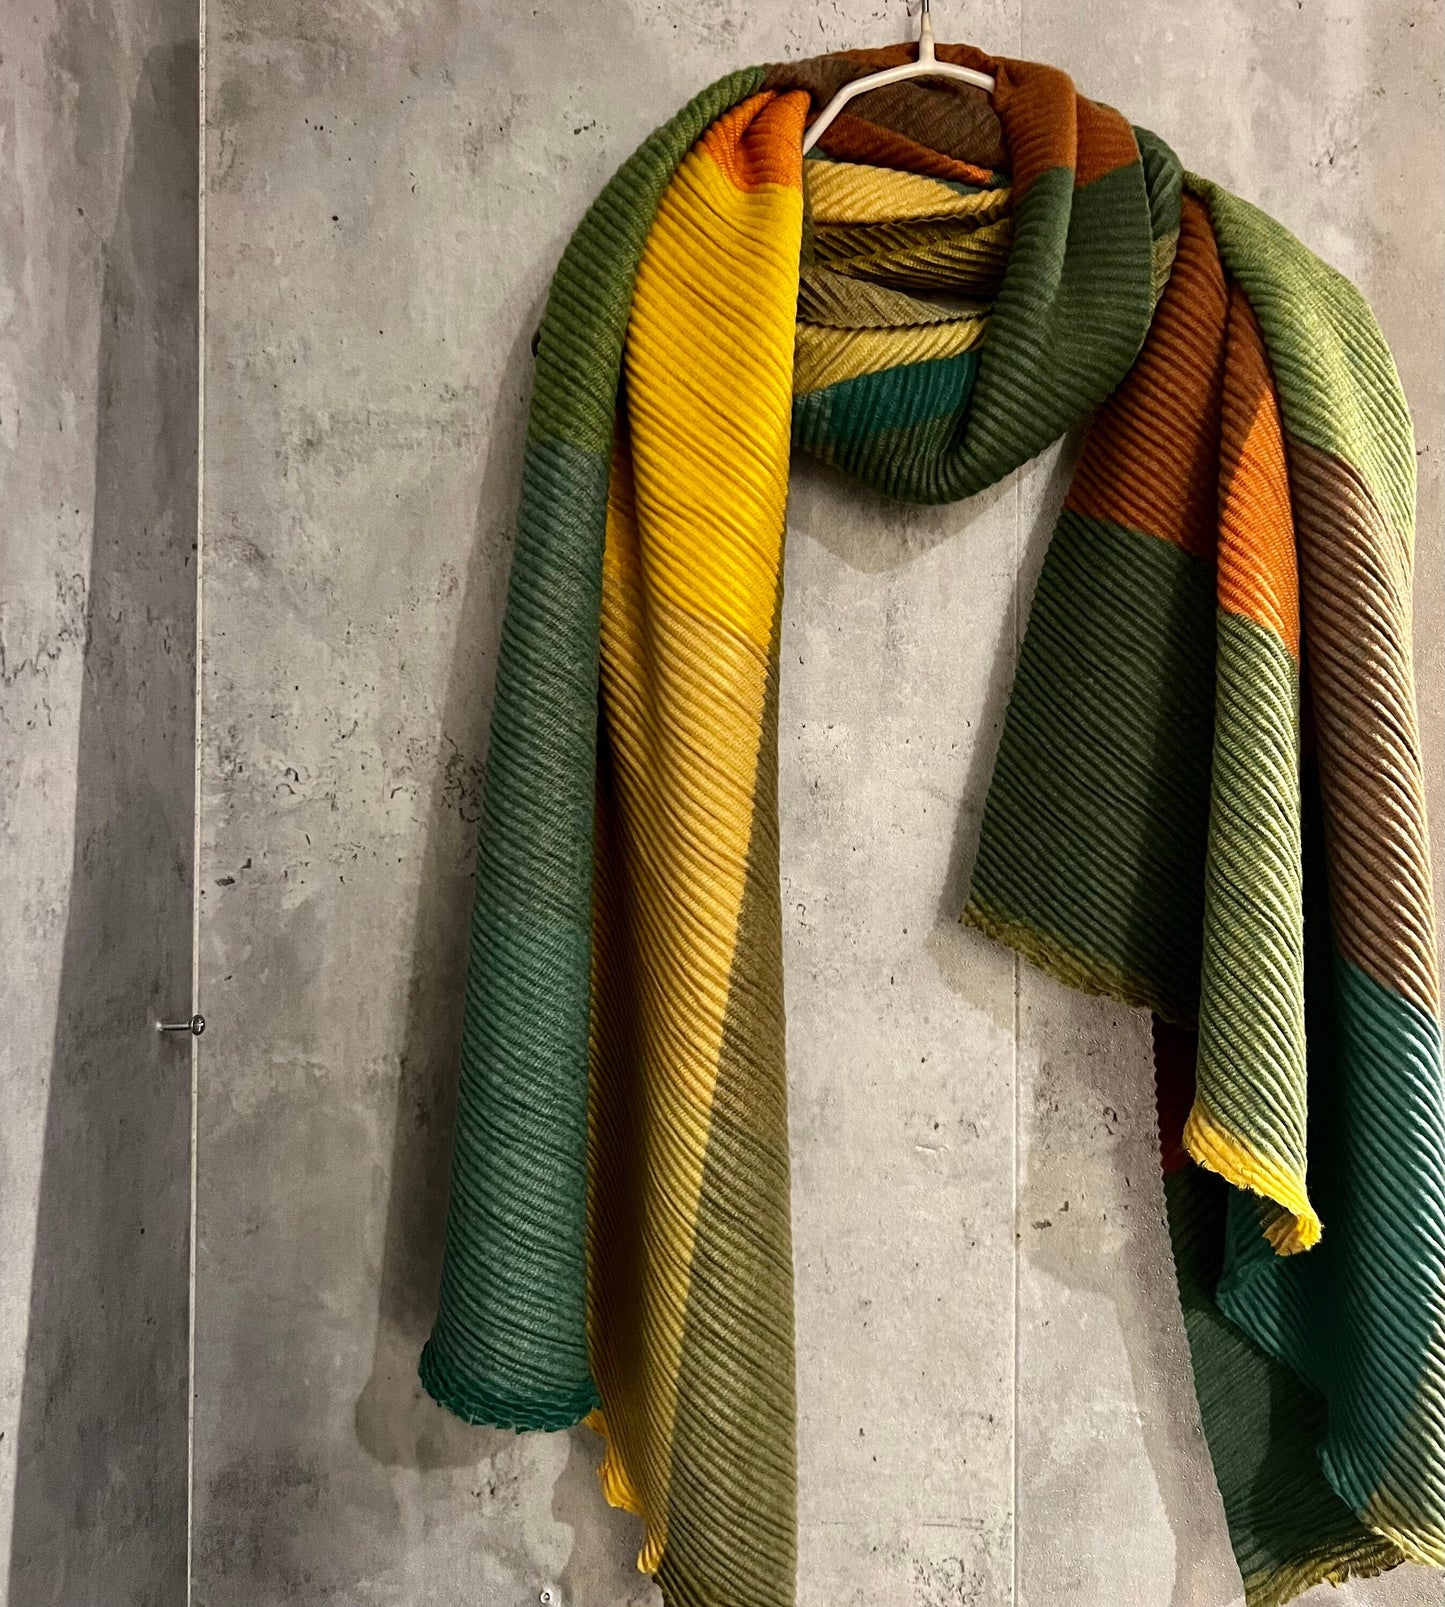 Block Pattern Green Orange Yellow Cashmere Blend Scarf/Autumn Winter Scarf/Gifts For Mum/Gifts For Her Birthday Christmas/Scarf Women